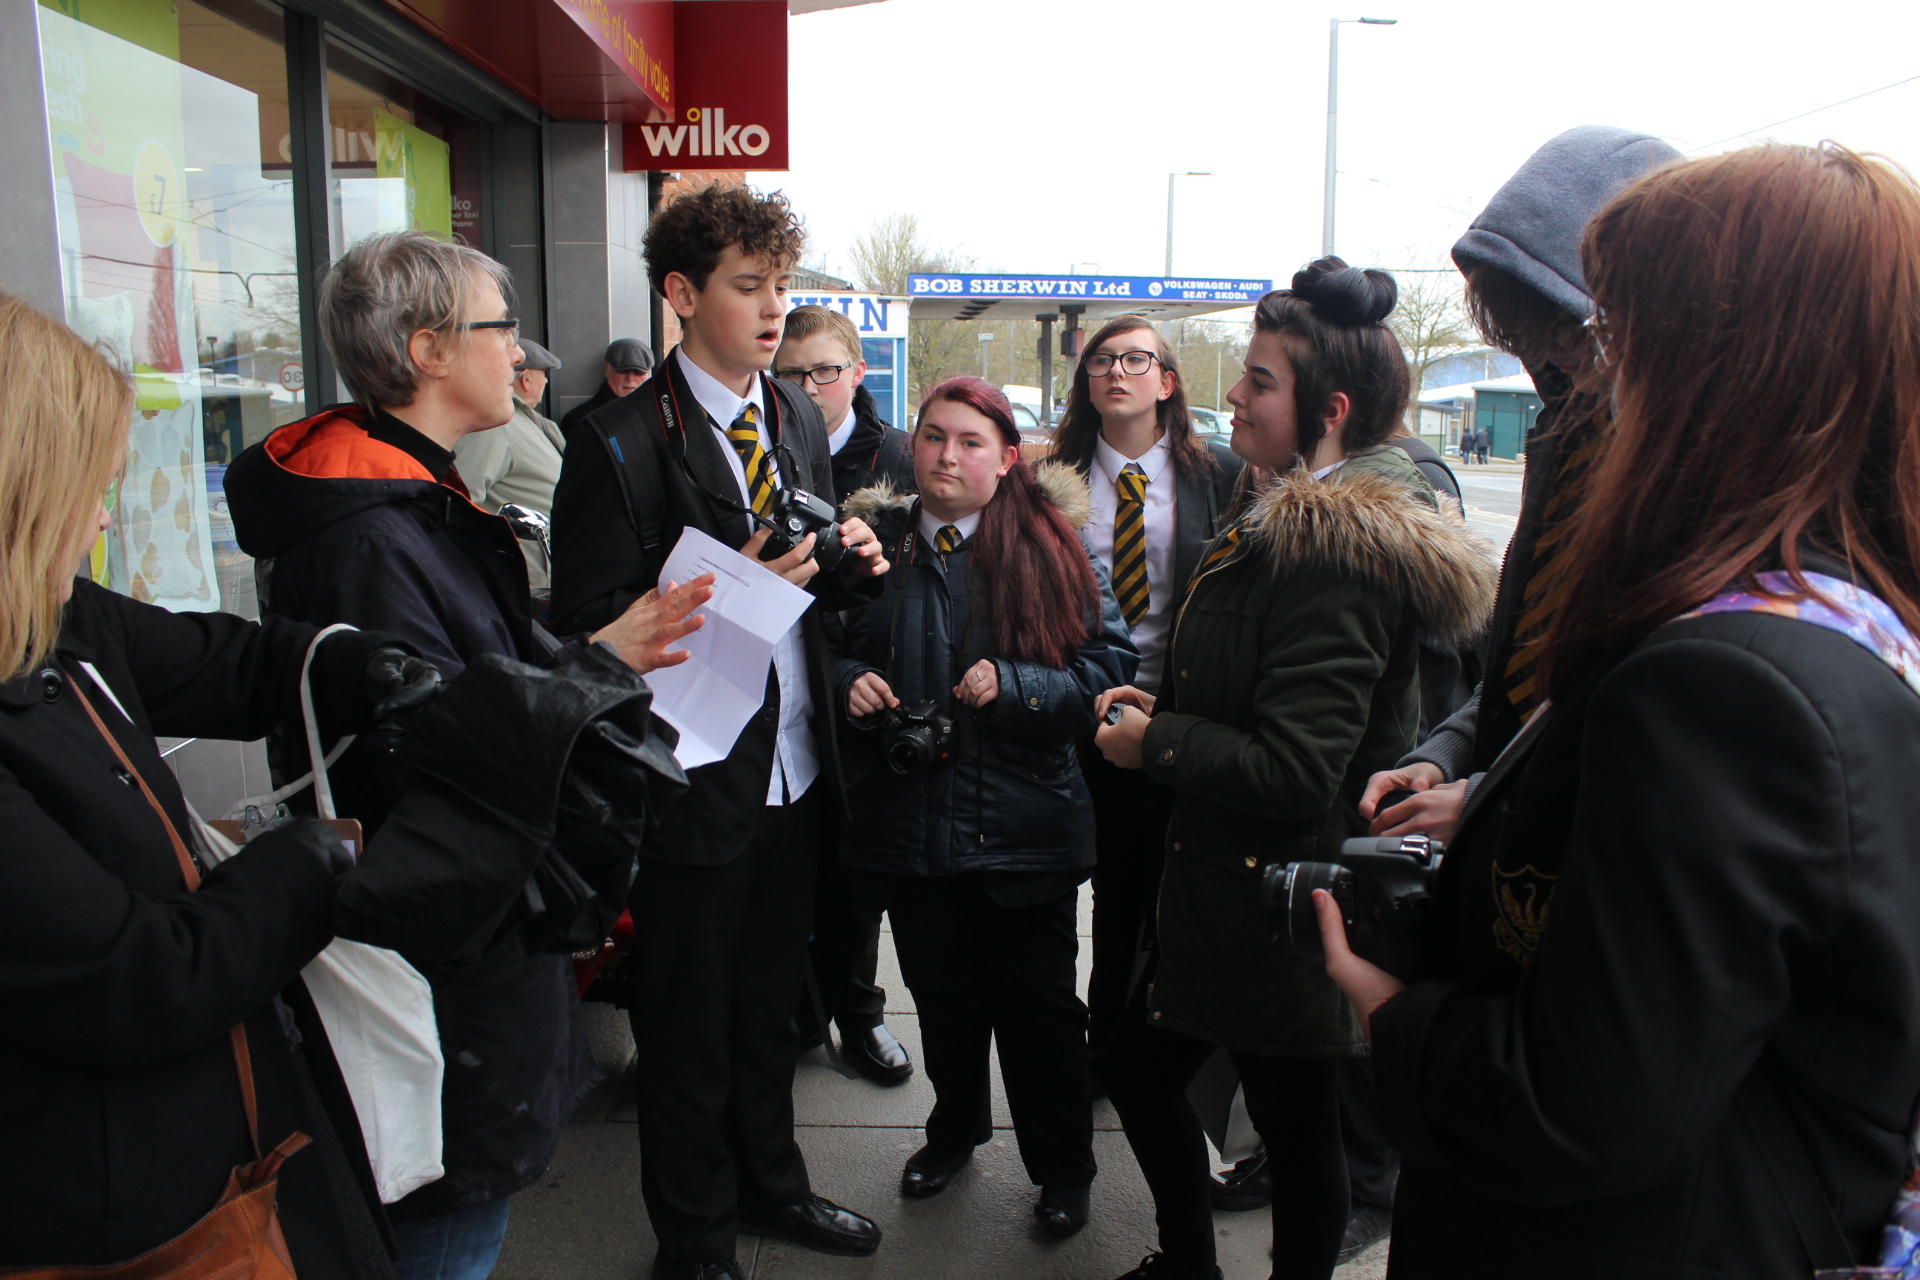 Katherine with group of students in Clifton, 2019